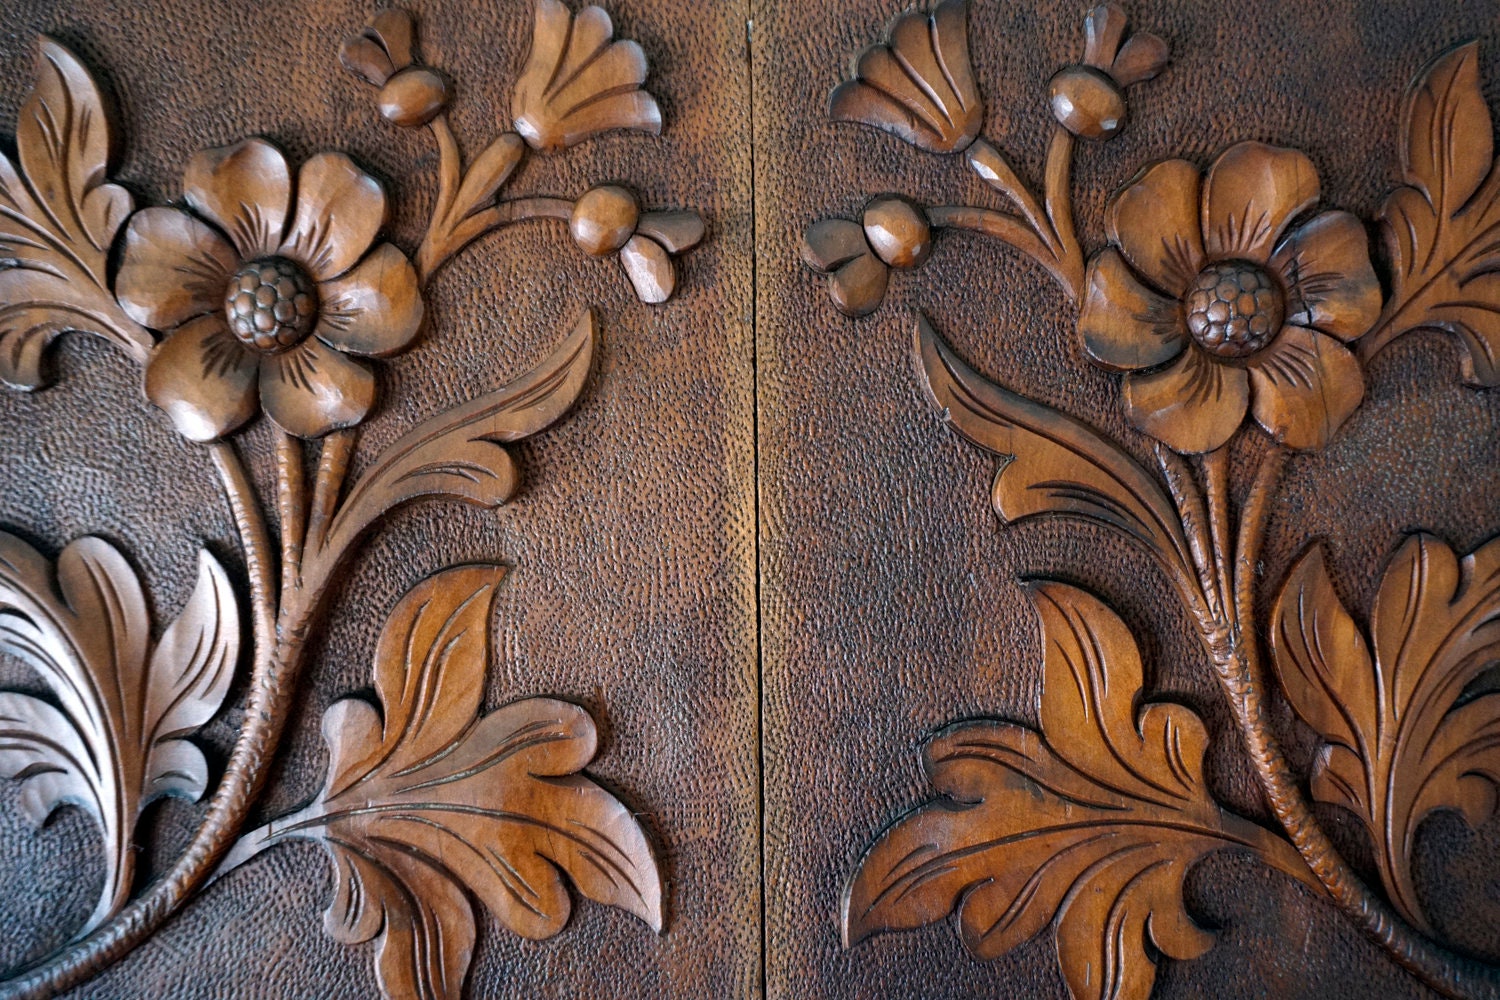 Pair of Antique Hand Carved Cherry Wood Decorative Panels